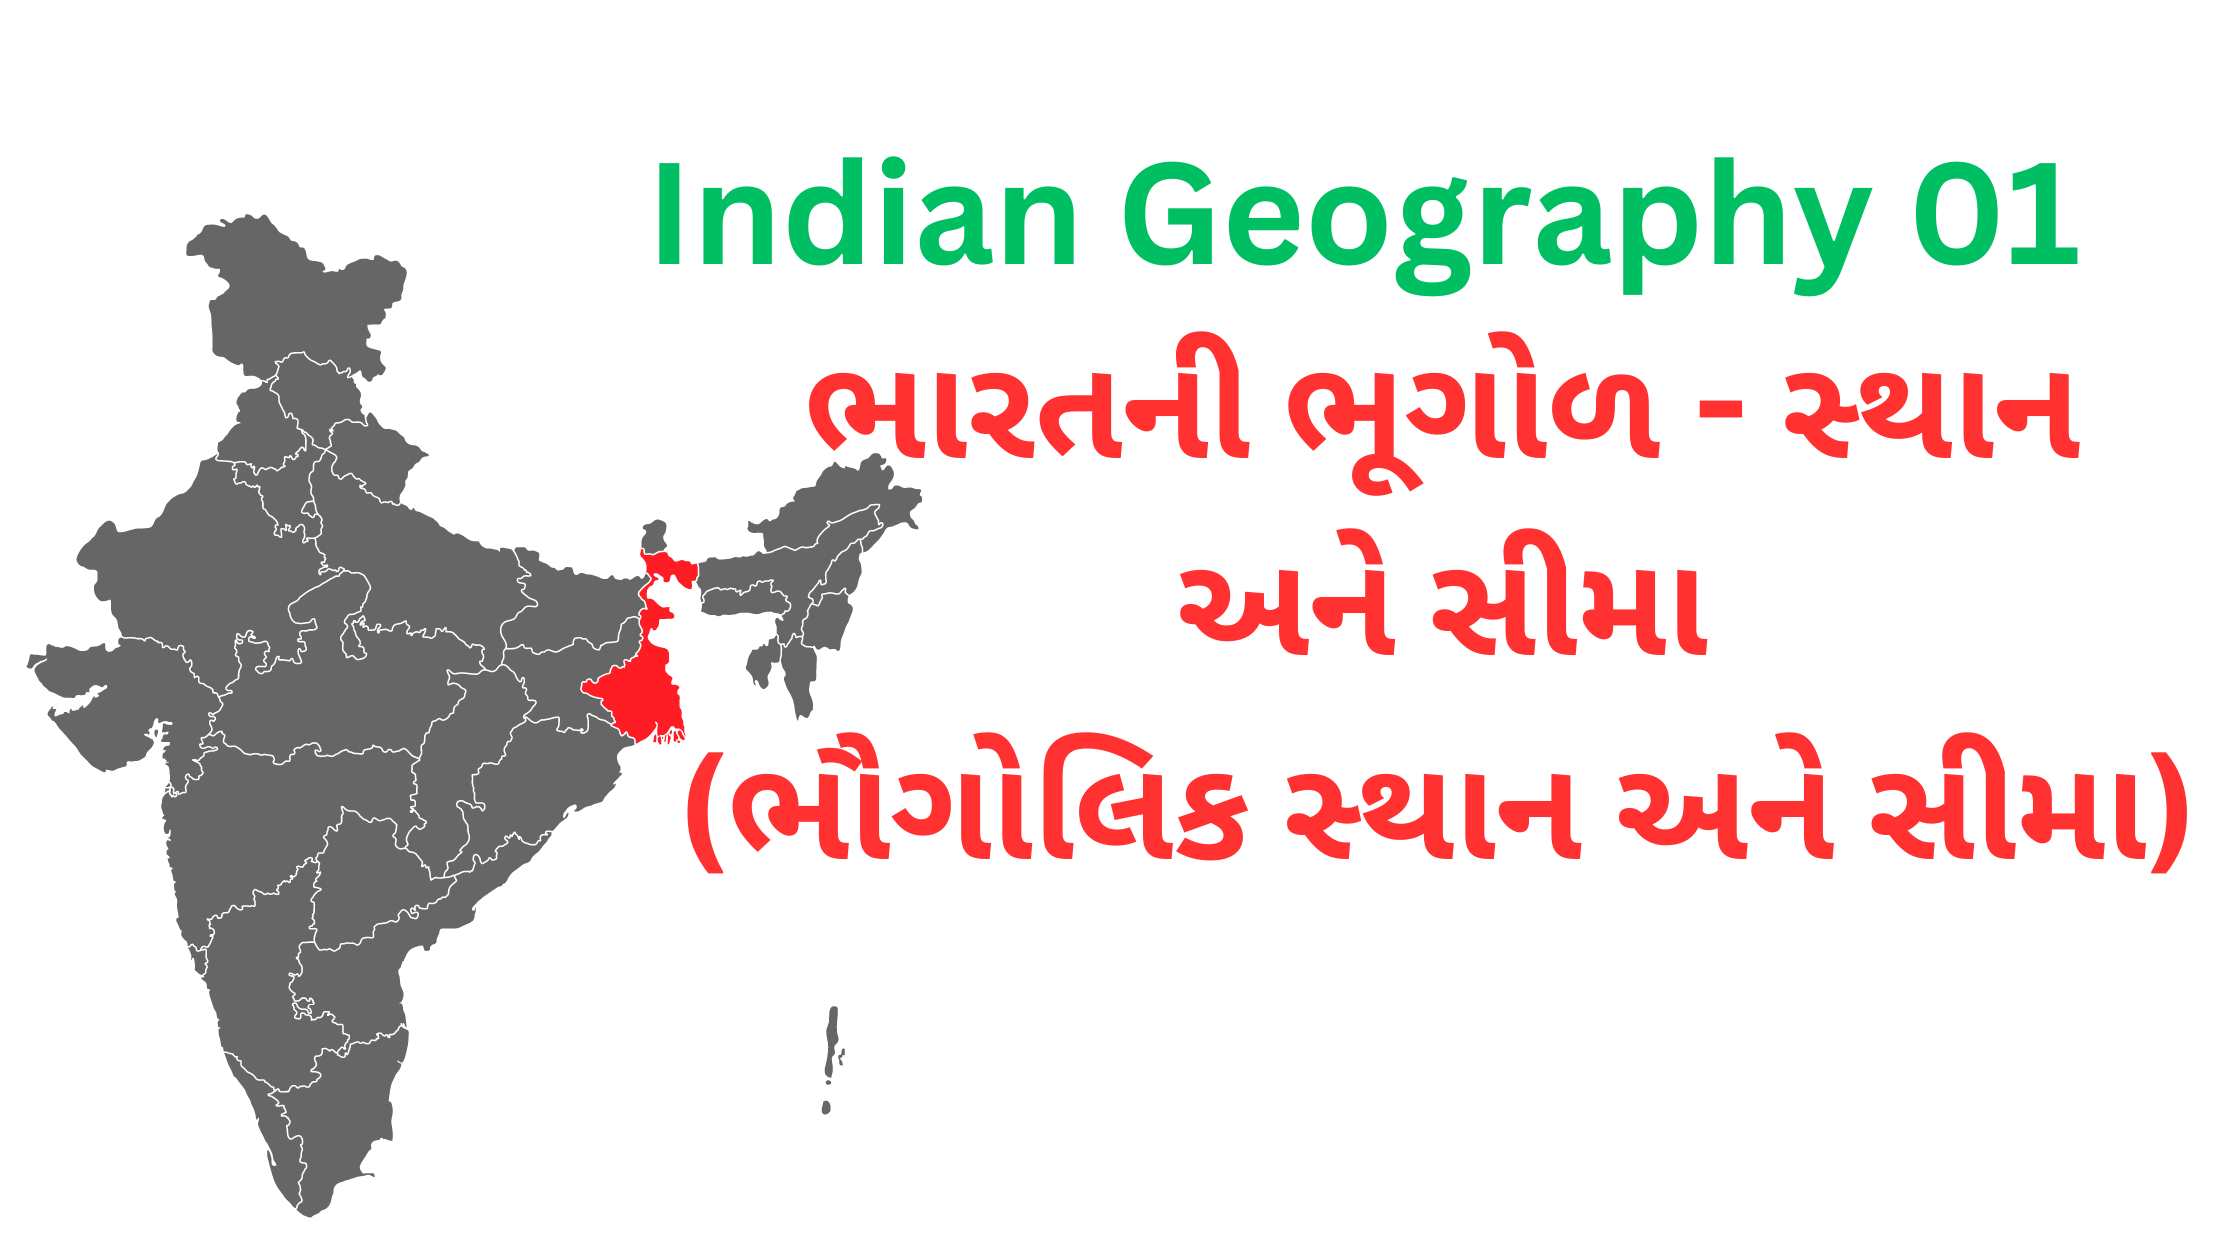 Indian Geography 01